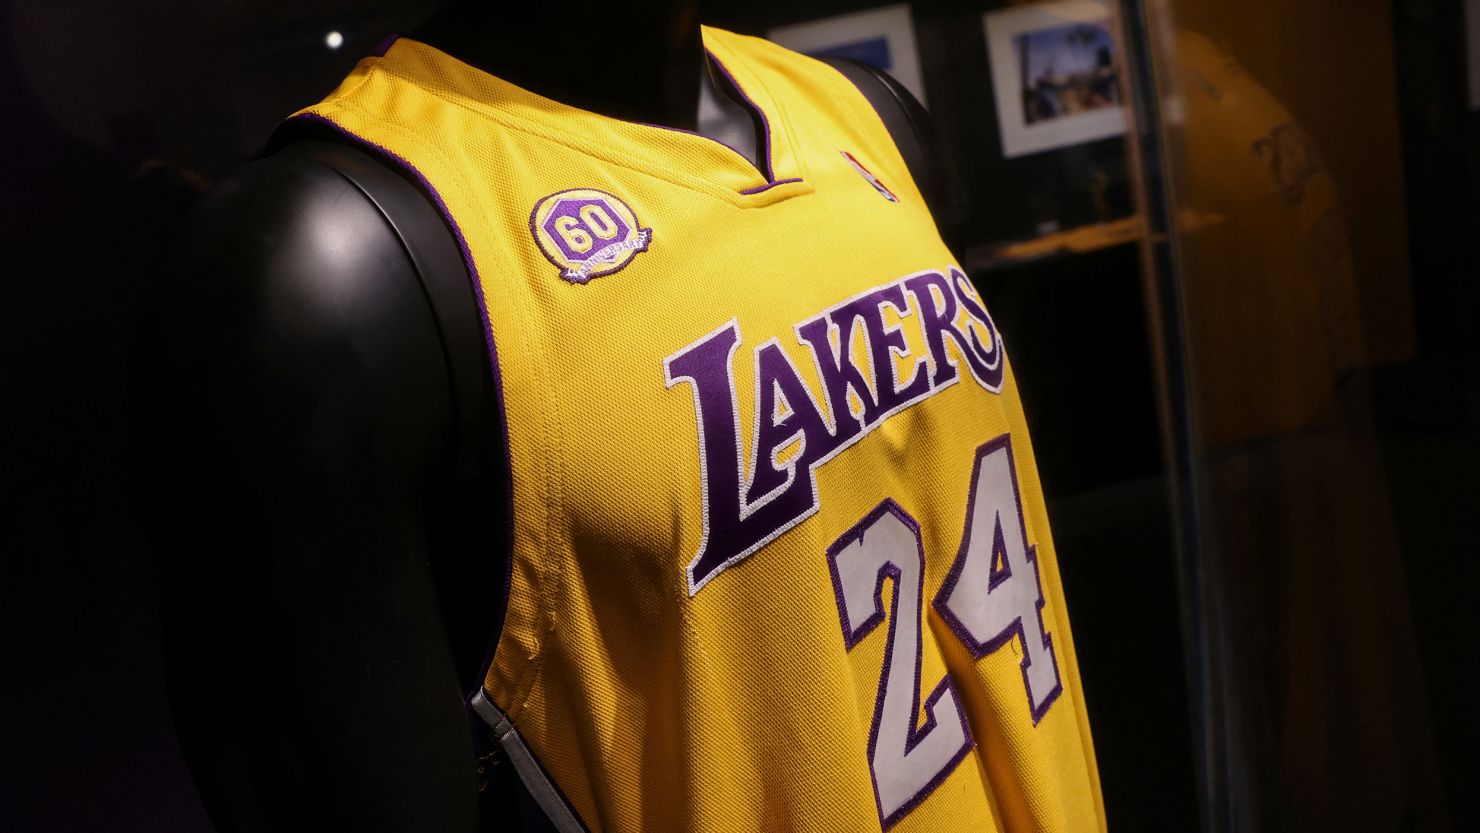 The market value of Kobe Bryant's No. 24 jersey had been estimated at $5-7 million.